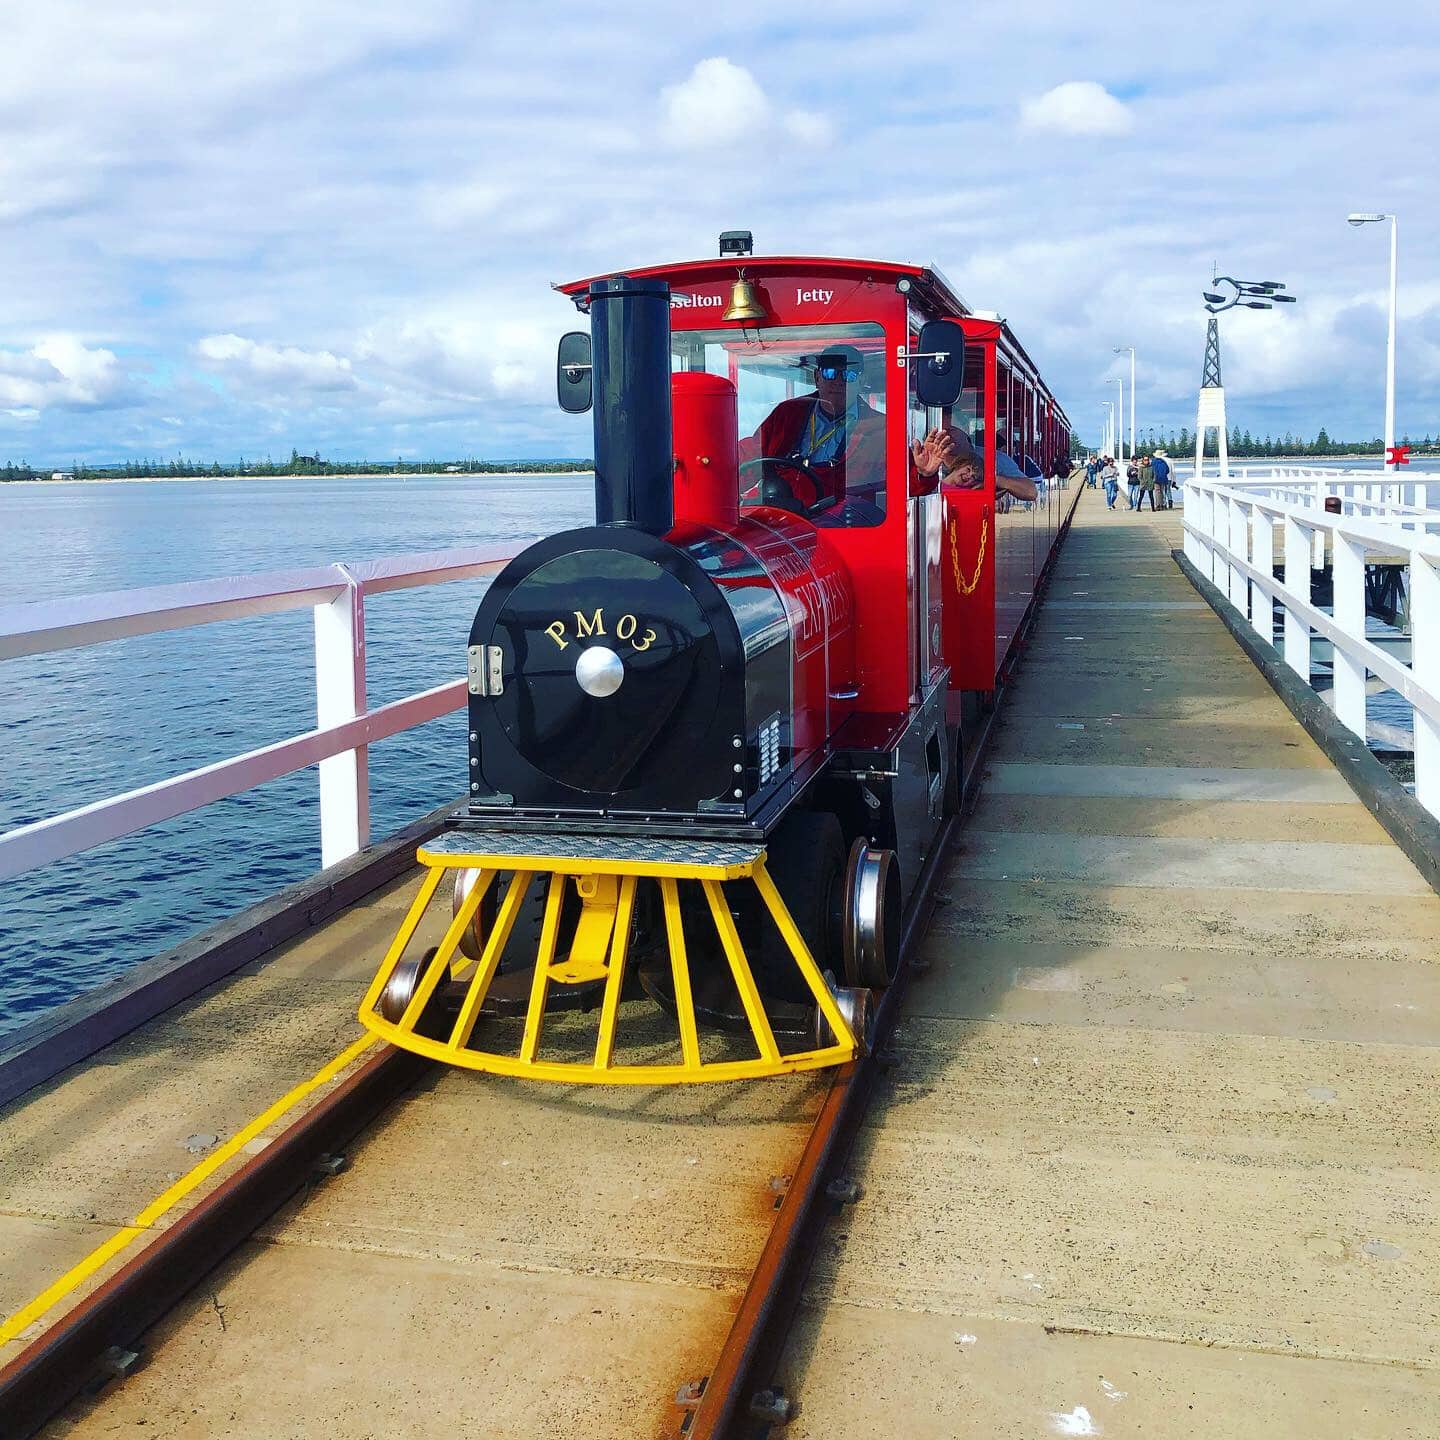 Train on the jetty